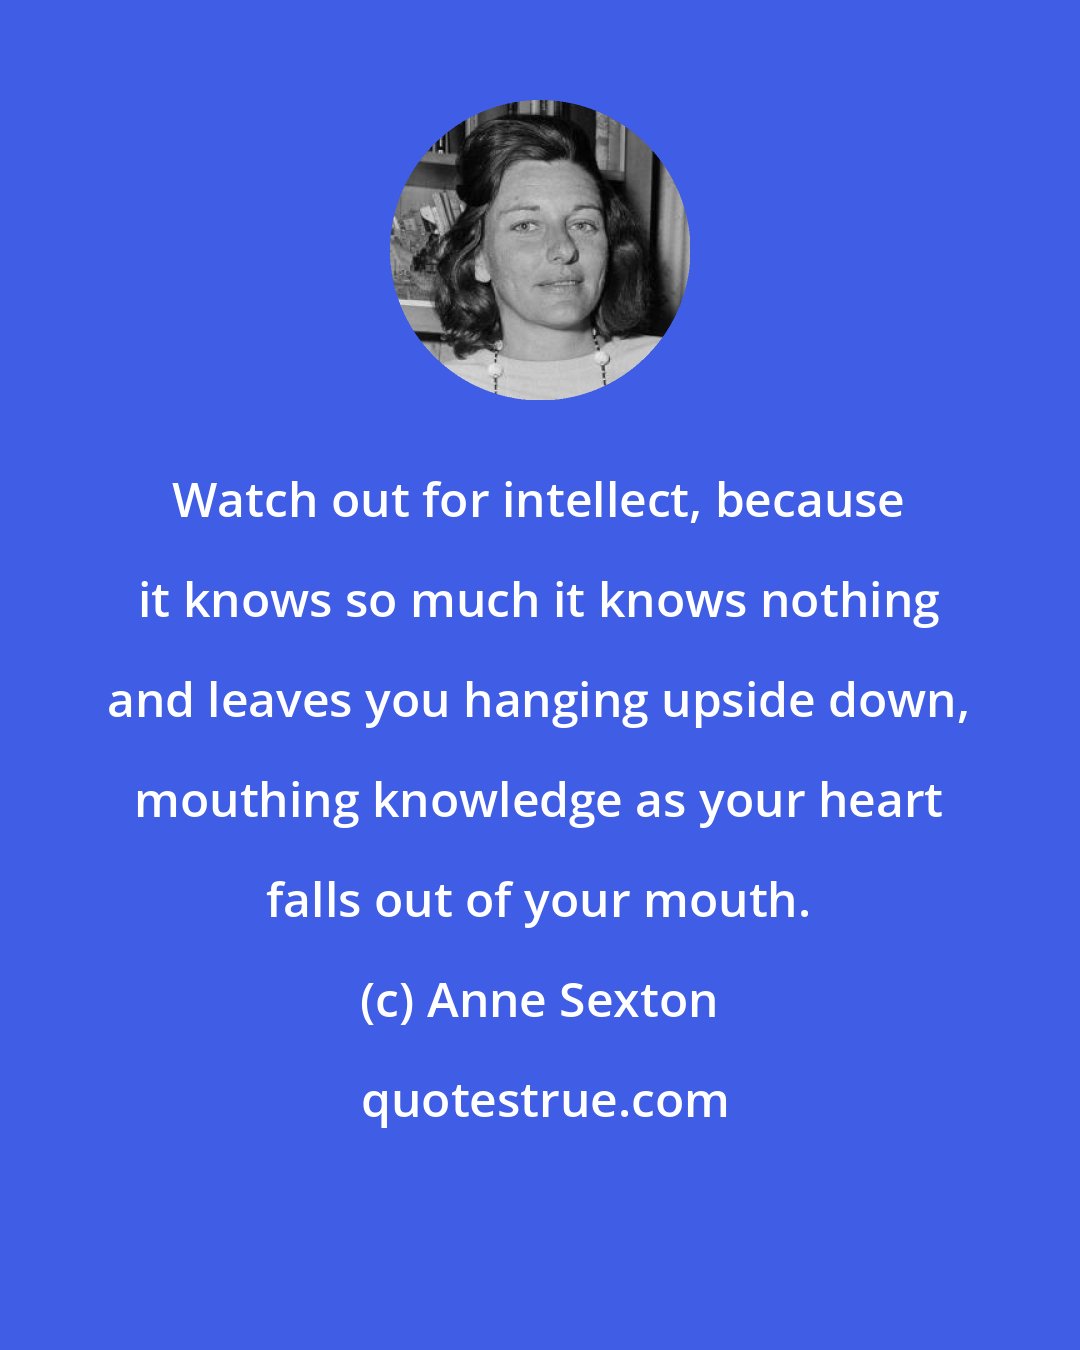 Anne Sexton: Watch out for intellect, because it knows so much it knows nothing and leaves you hanging upside down, mouthing knowledge as your heart falls out of your mouth.